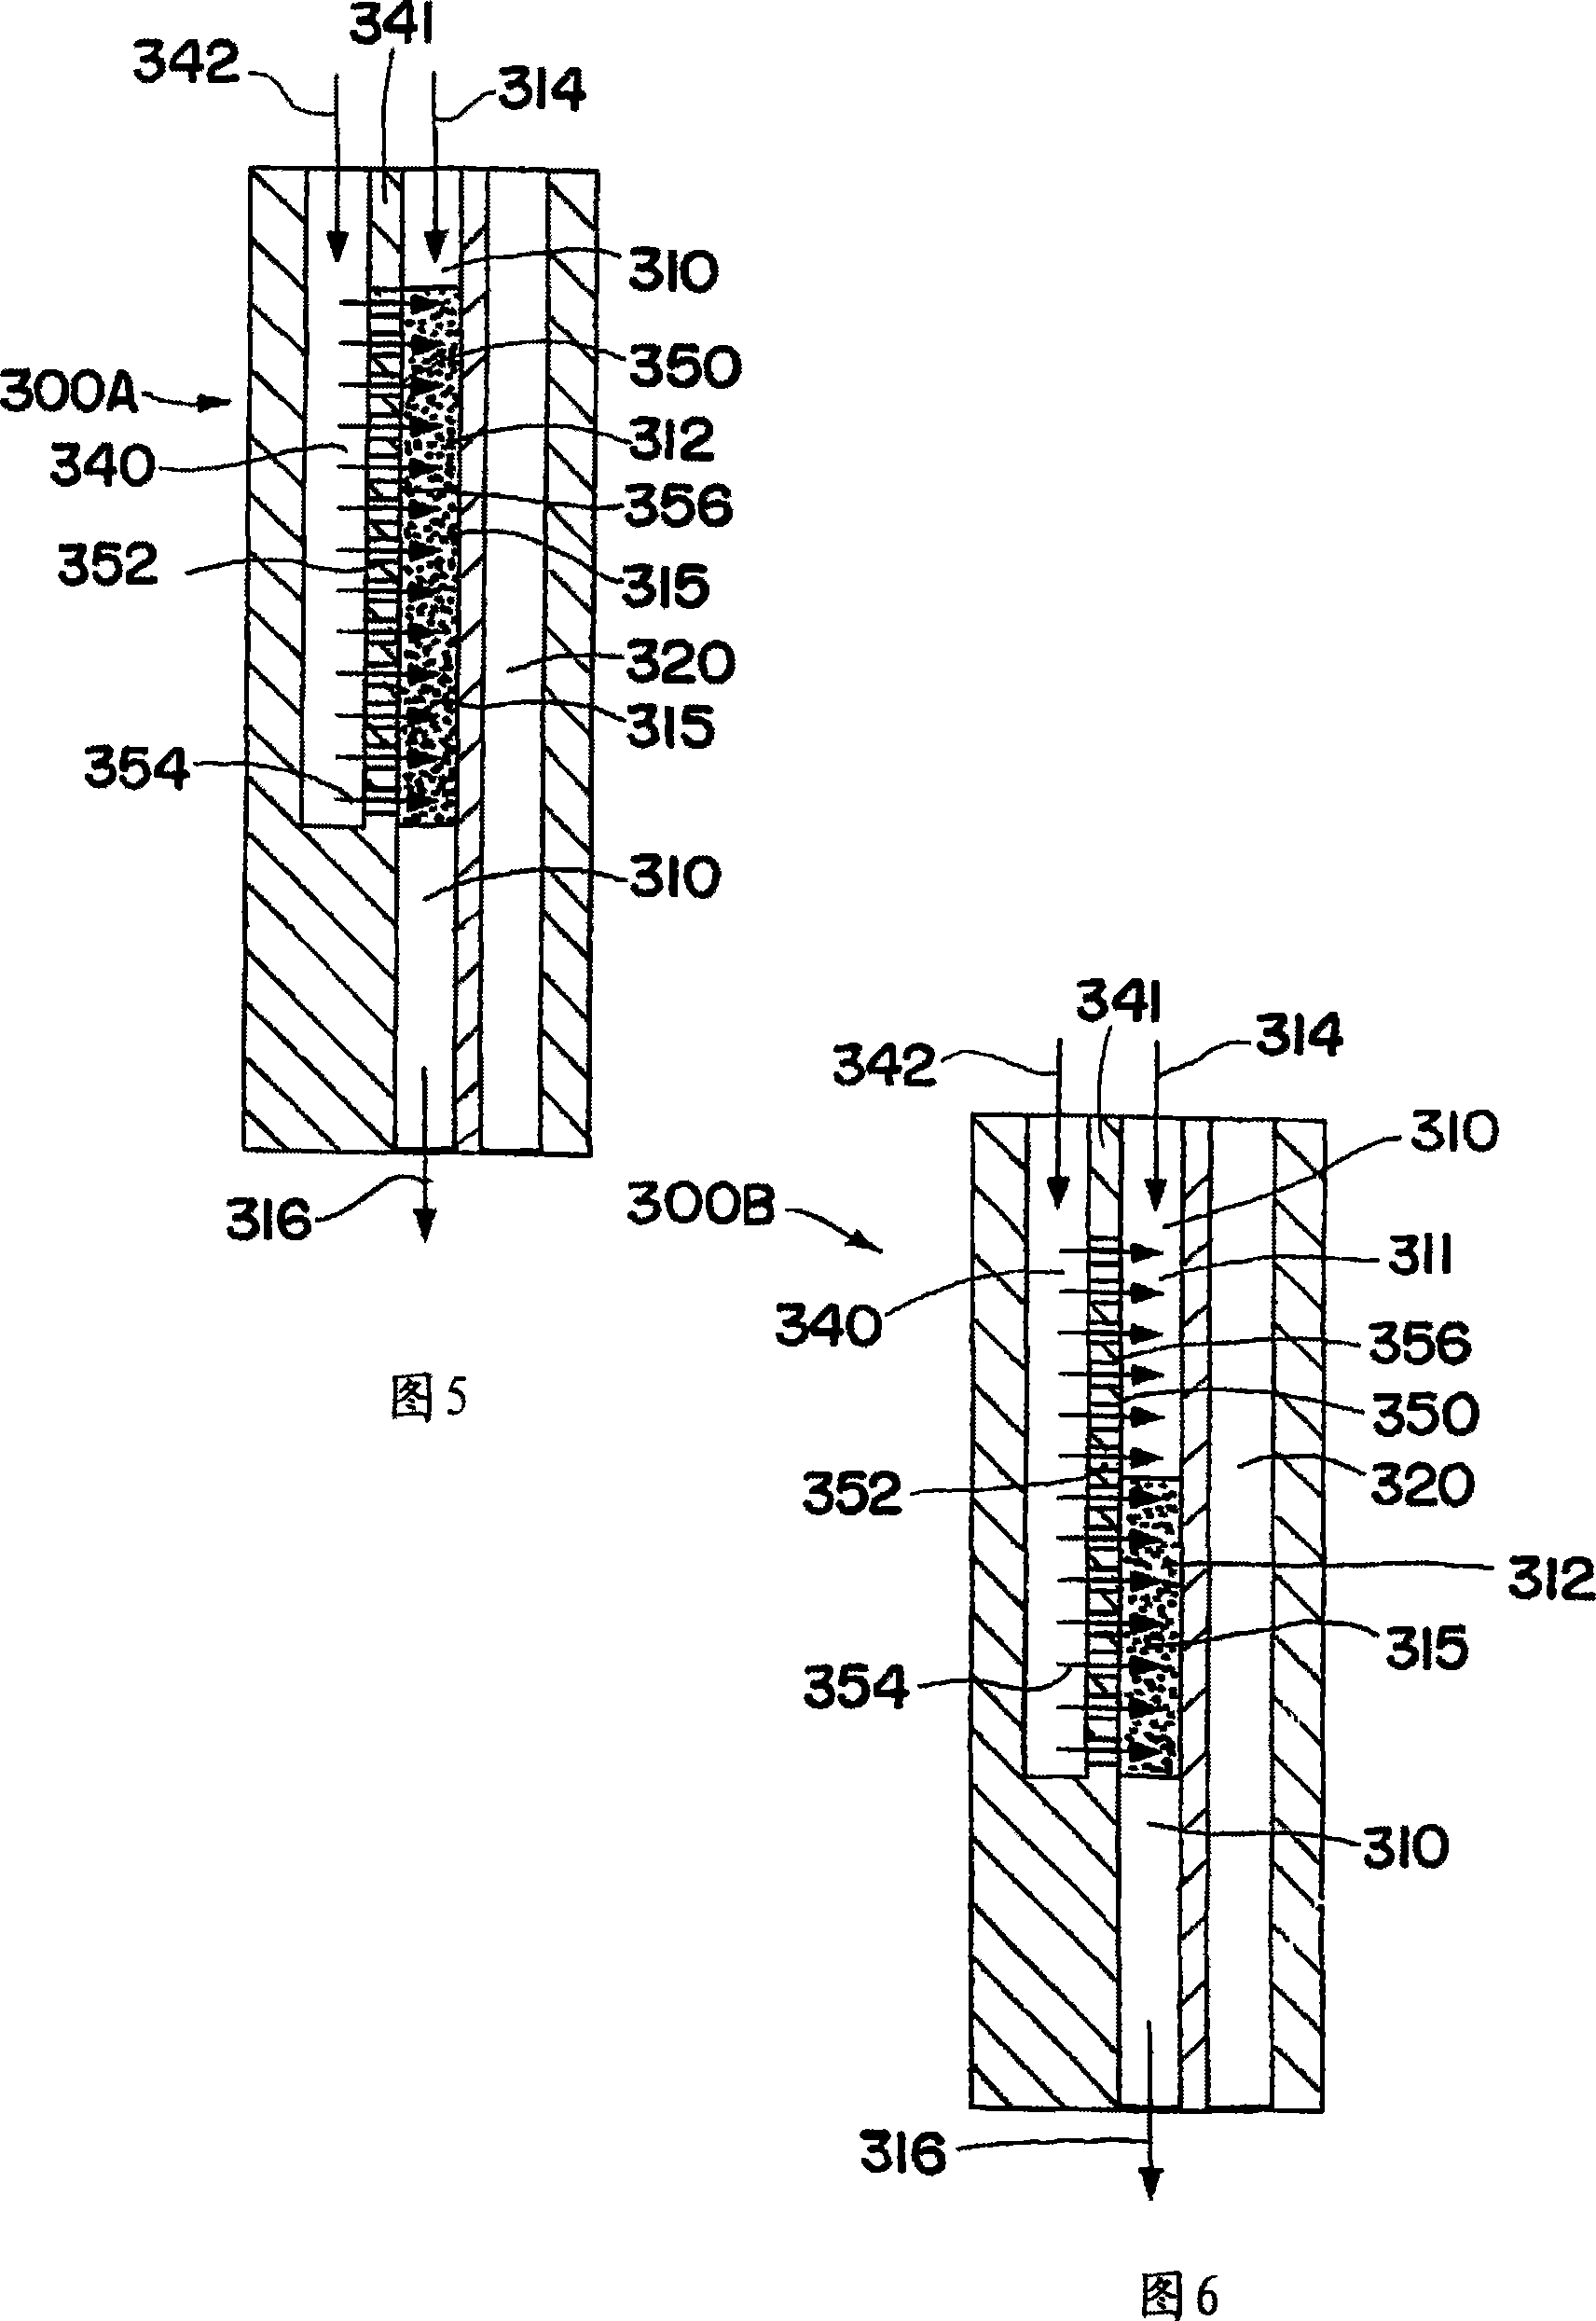 Process using microchannel technology for conducting alkylation or acylation reaction